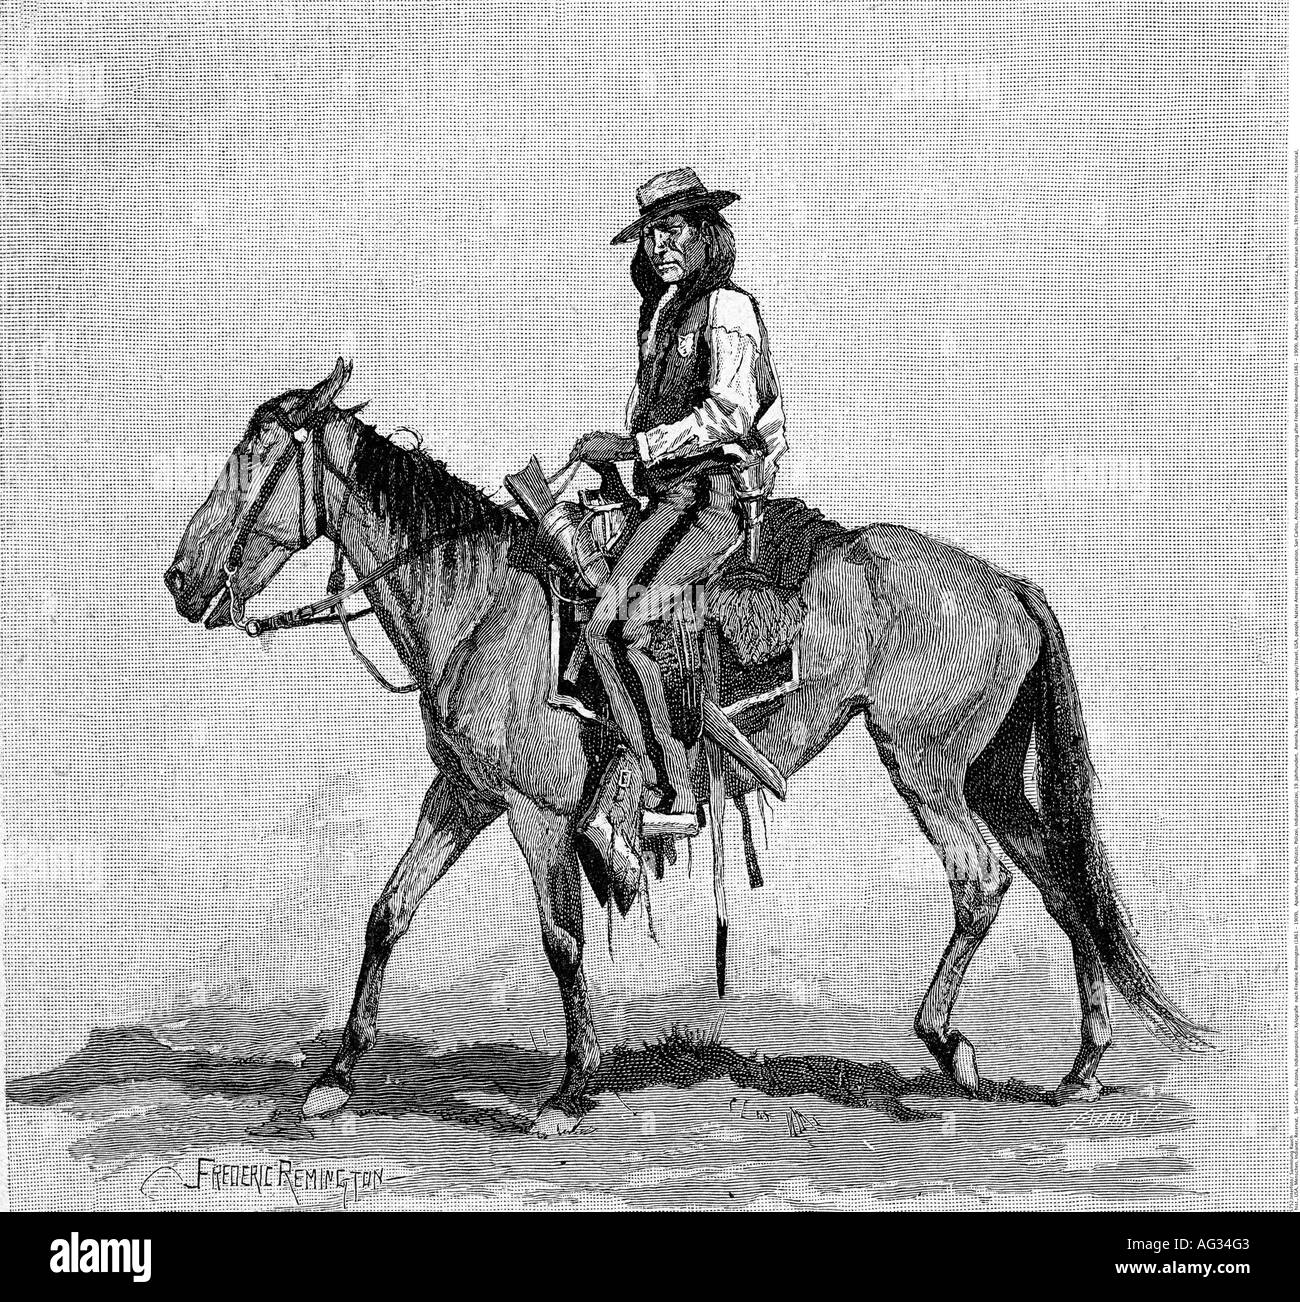 geography/travel, USA, people, Native Americans, reservation, San Carlos, Arizona, native policeman, engraving after Frederic Remington (1861 - 1909), Apache, police, North America, American Indians, 19th century, historic, historical, Stock Photo